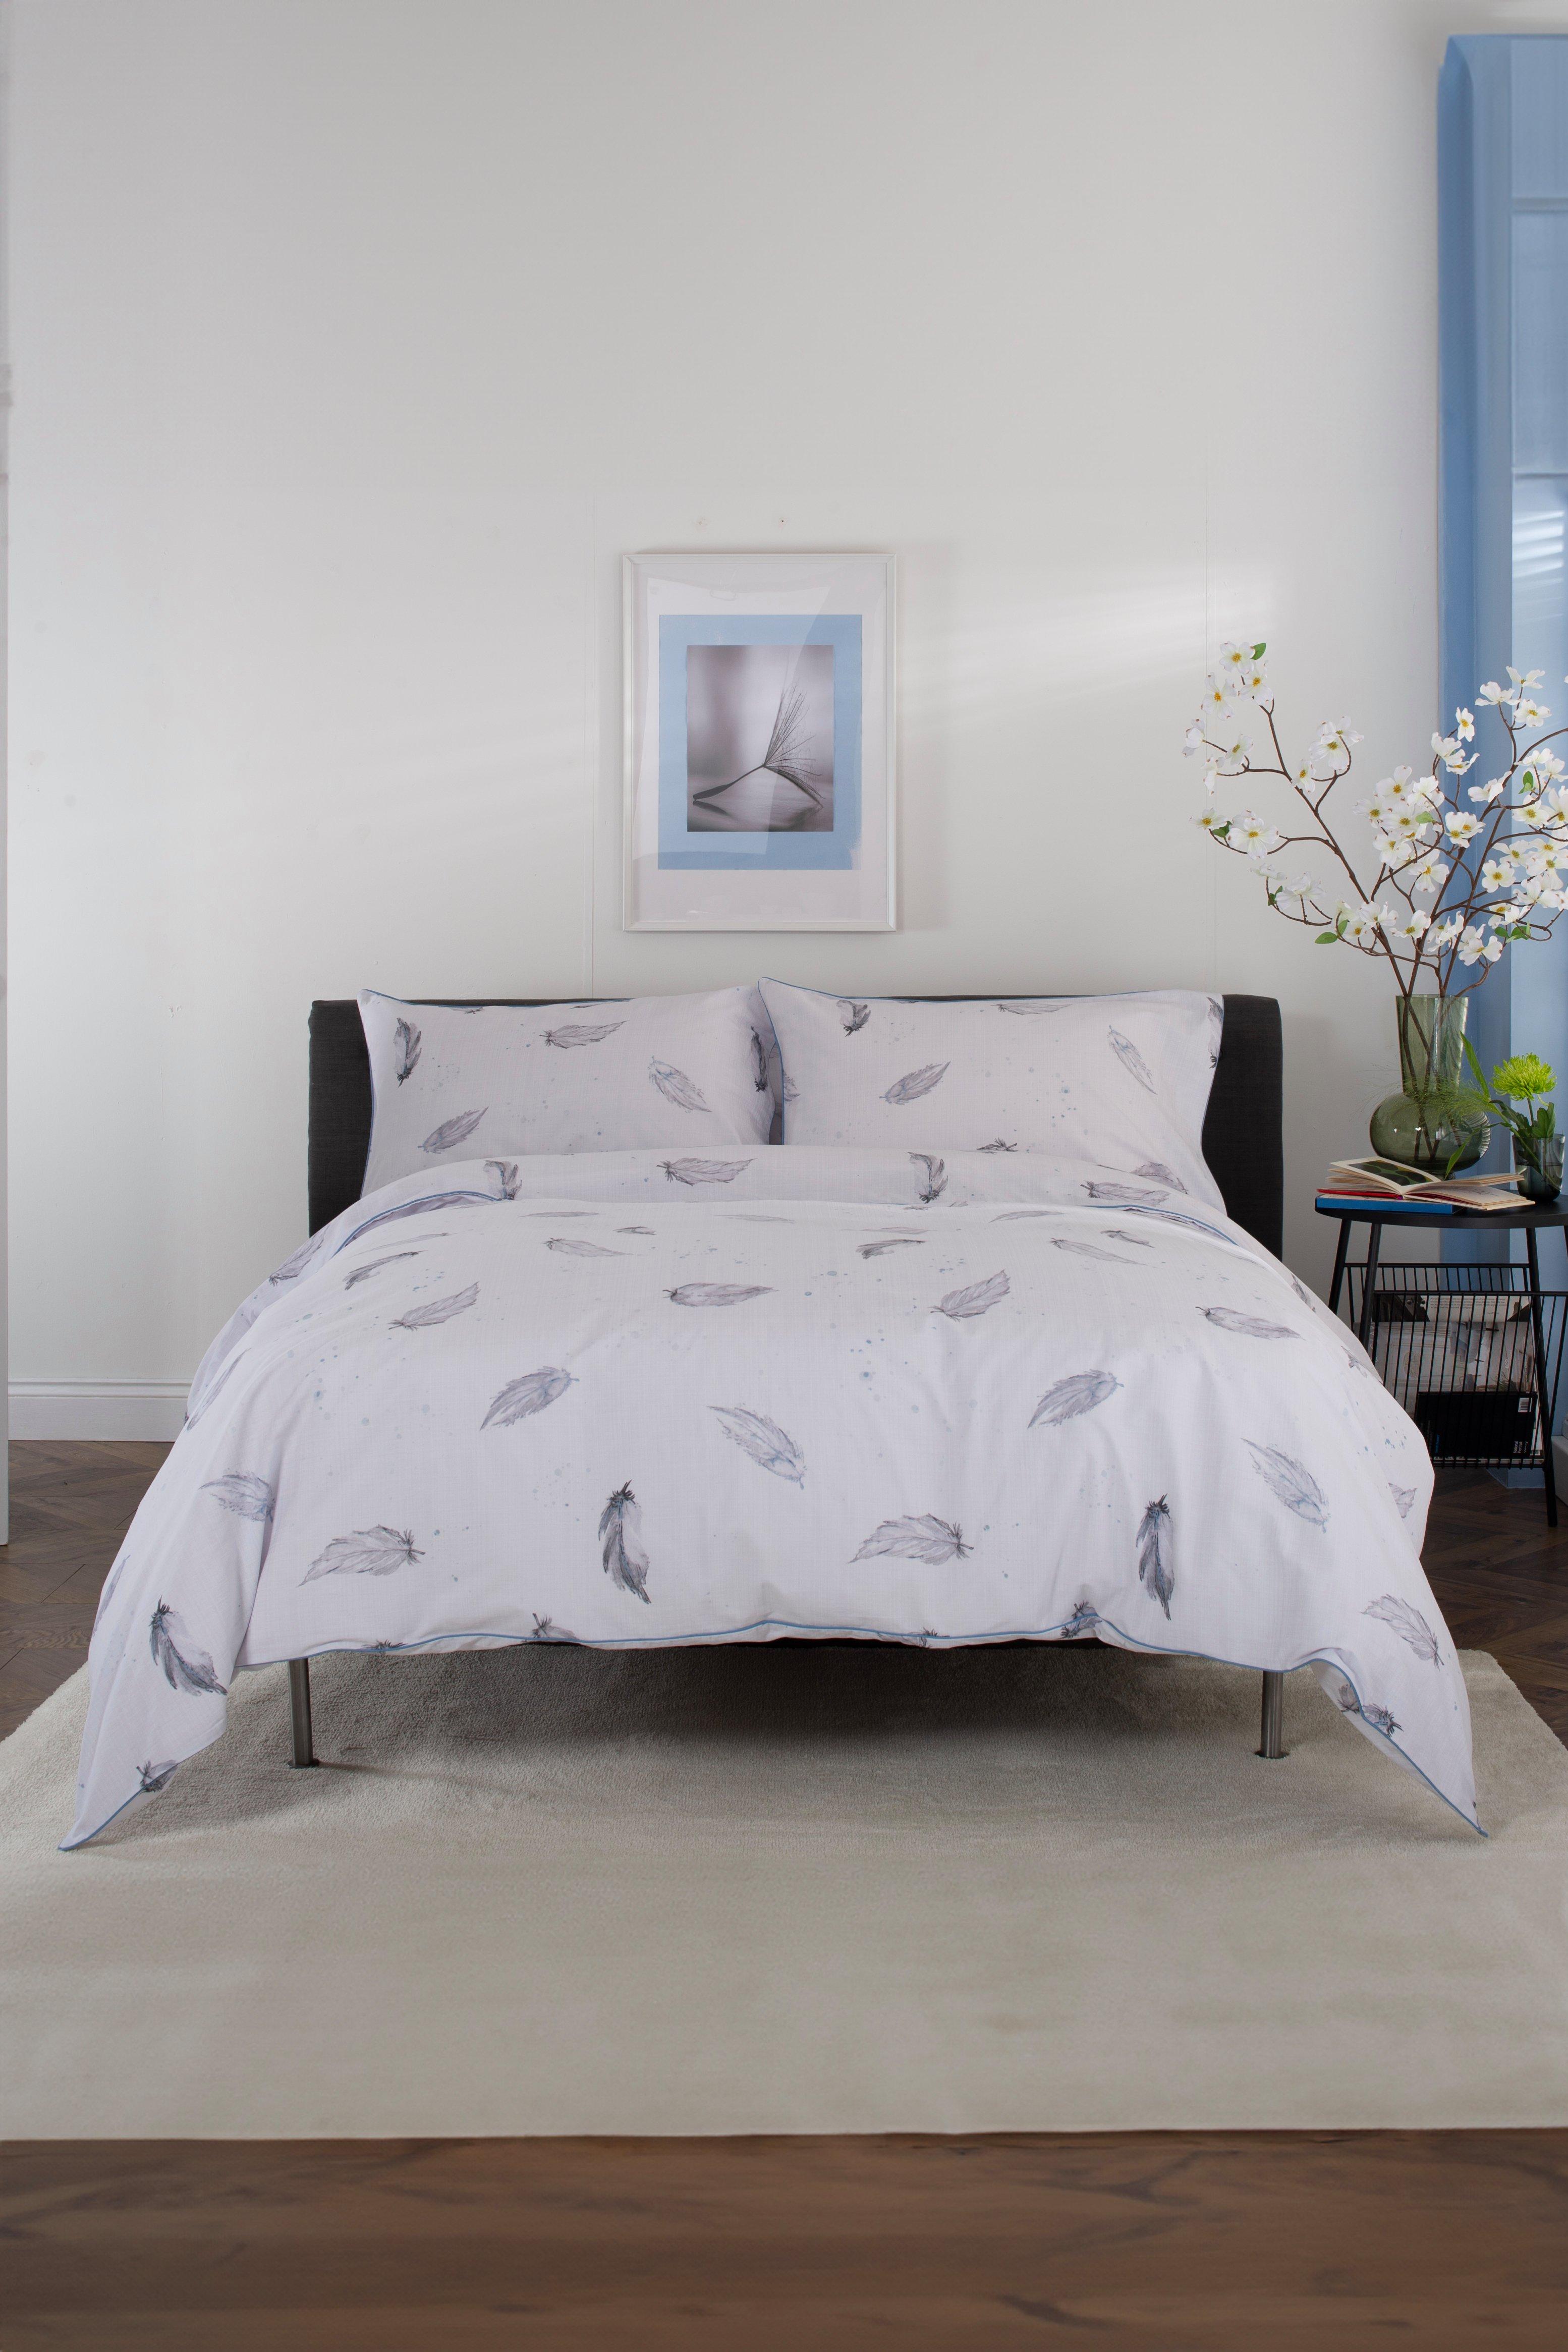 Swirl of Feathers Printed Percale Cotton Piped Duvet Cover Set